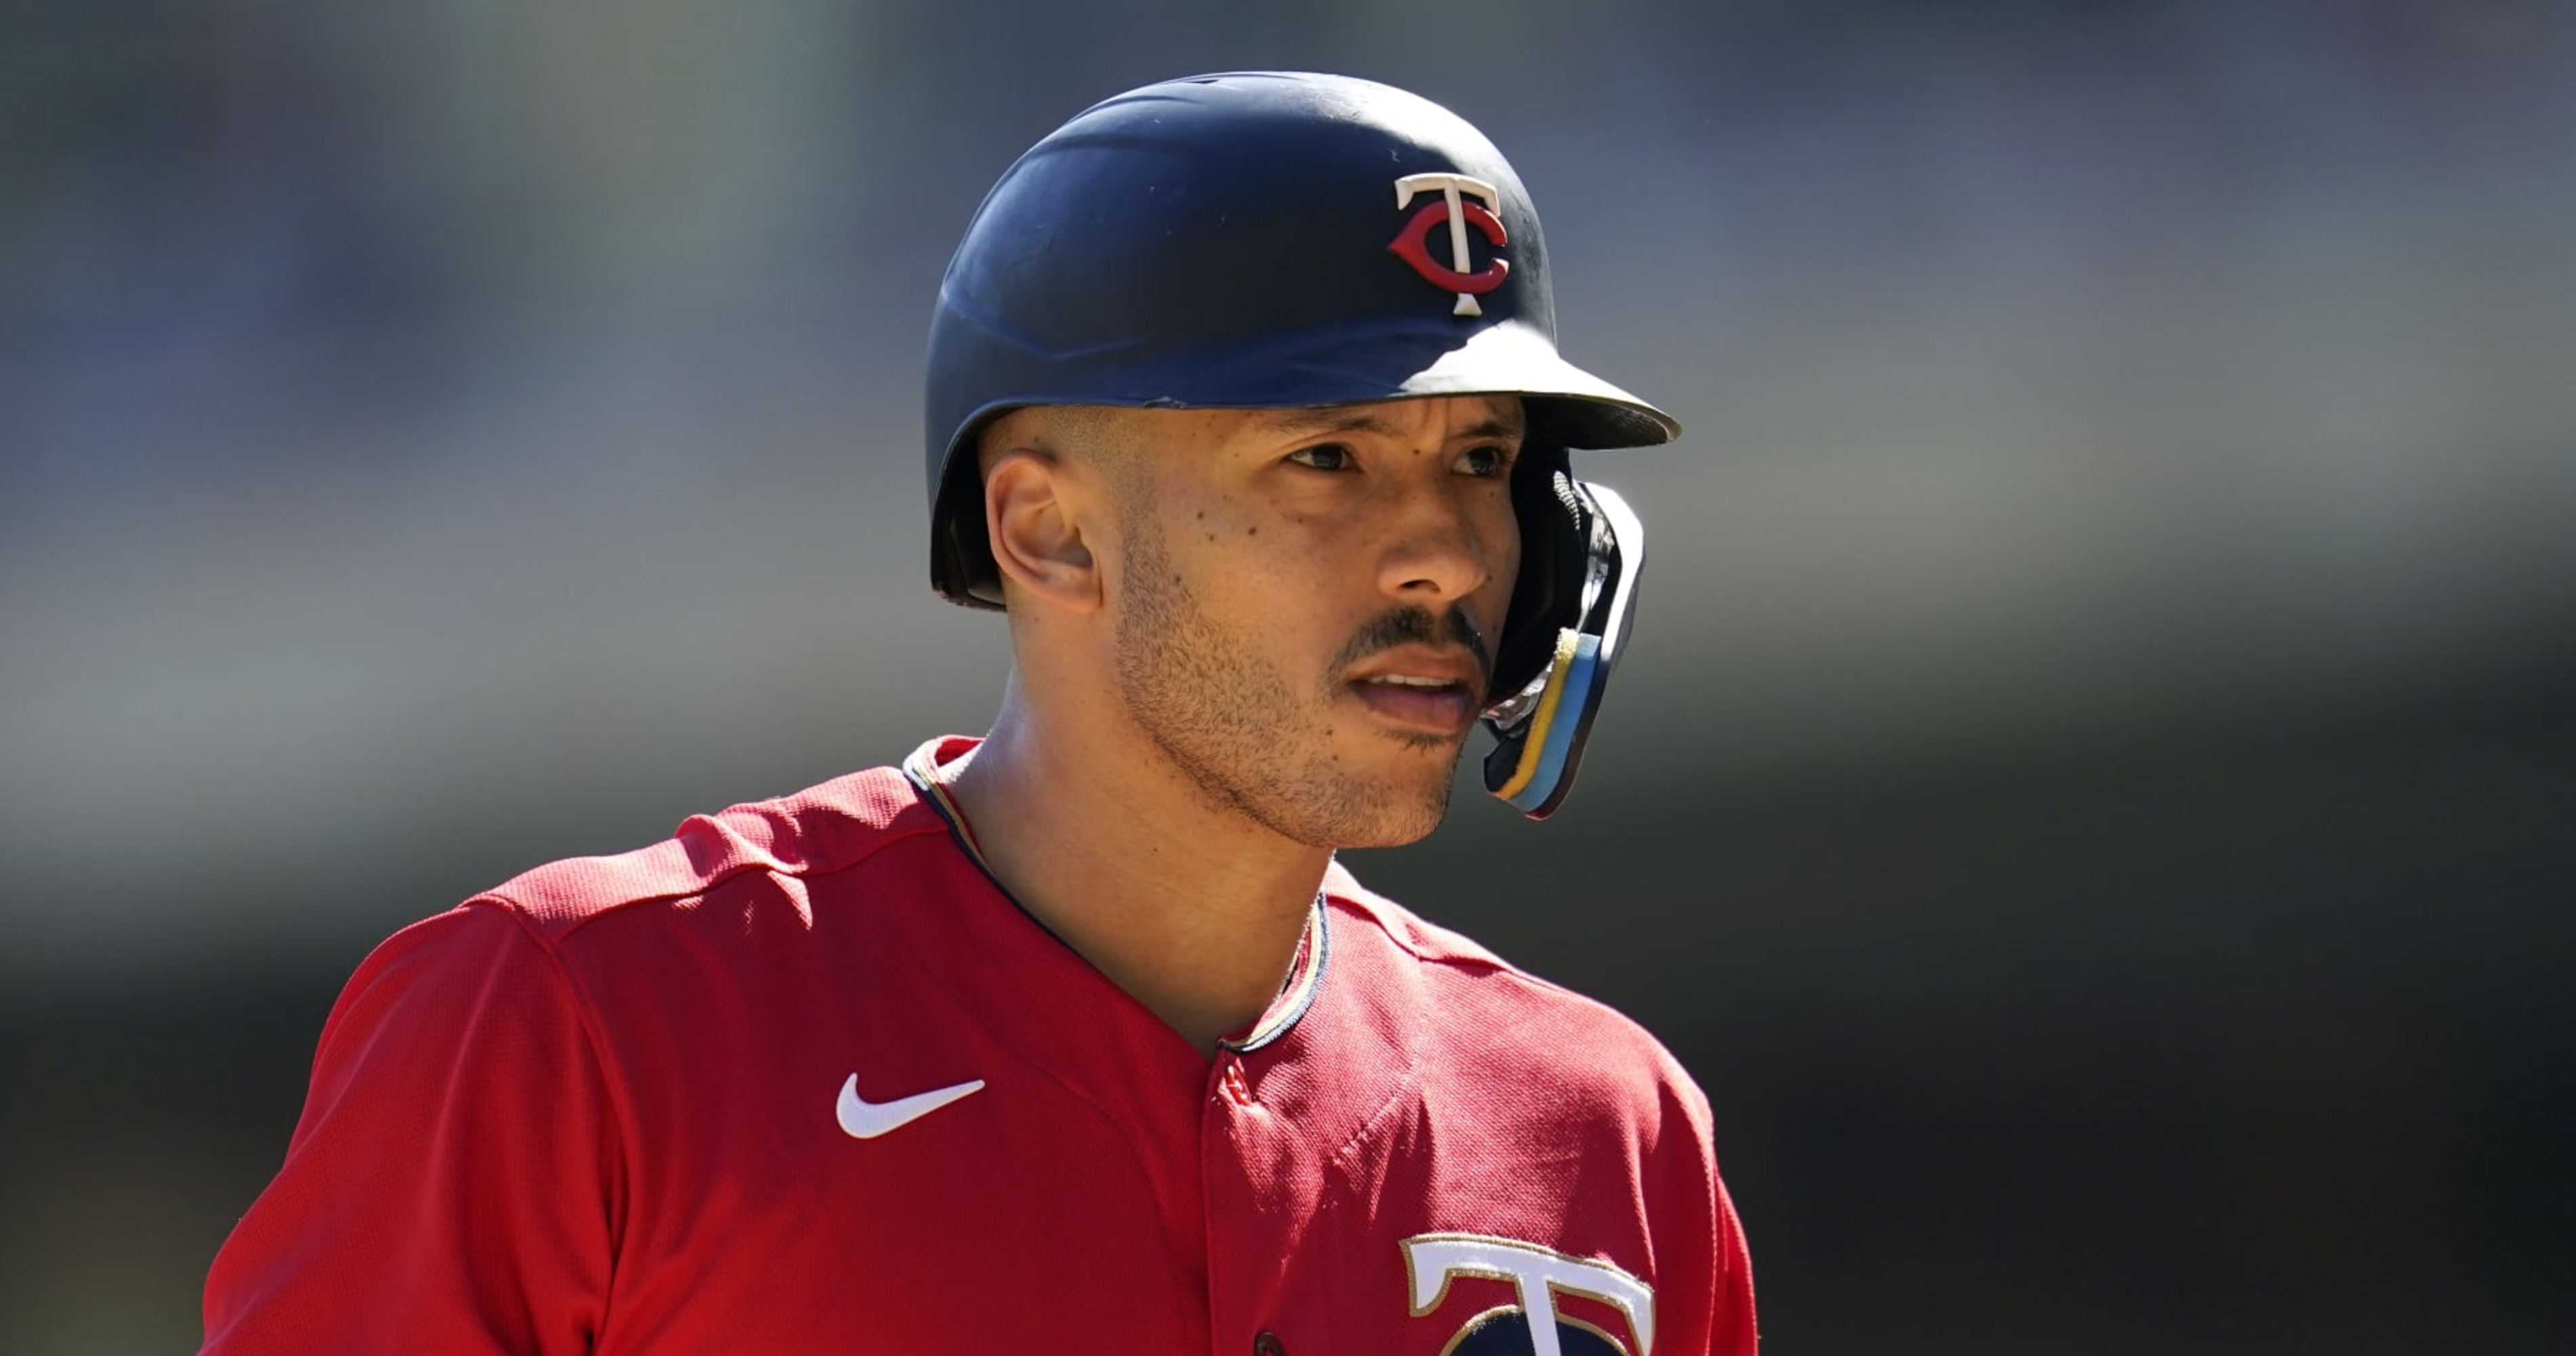 The Carlos Correa warning sign no one realized before Mets drama